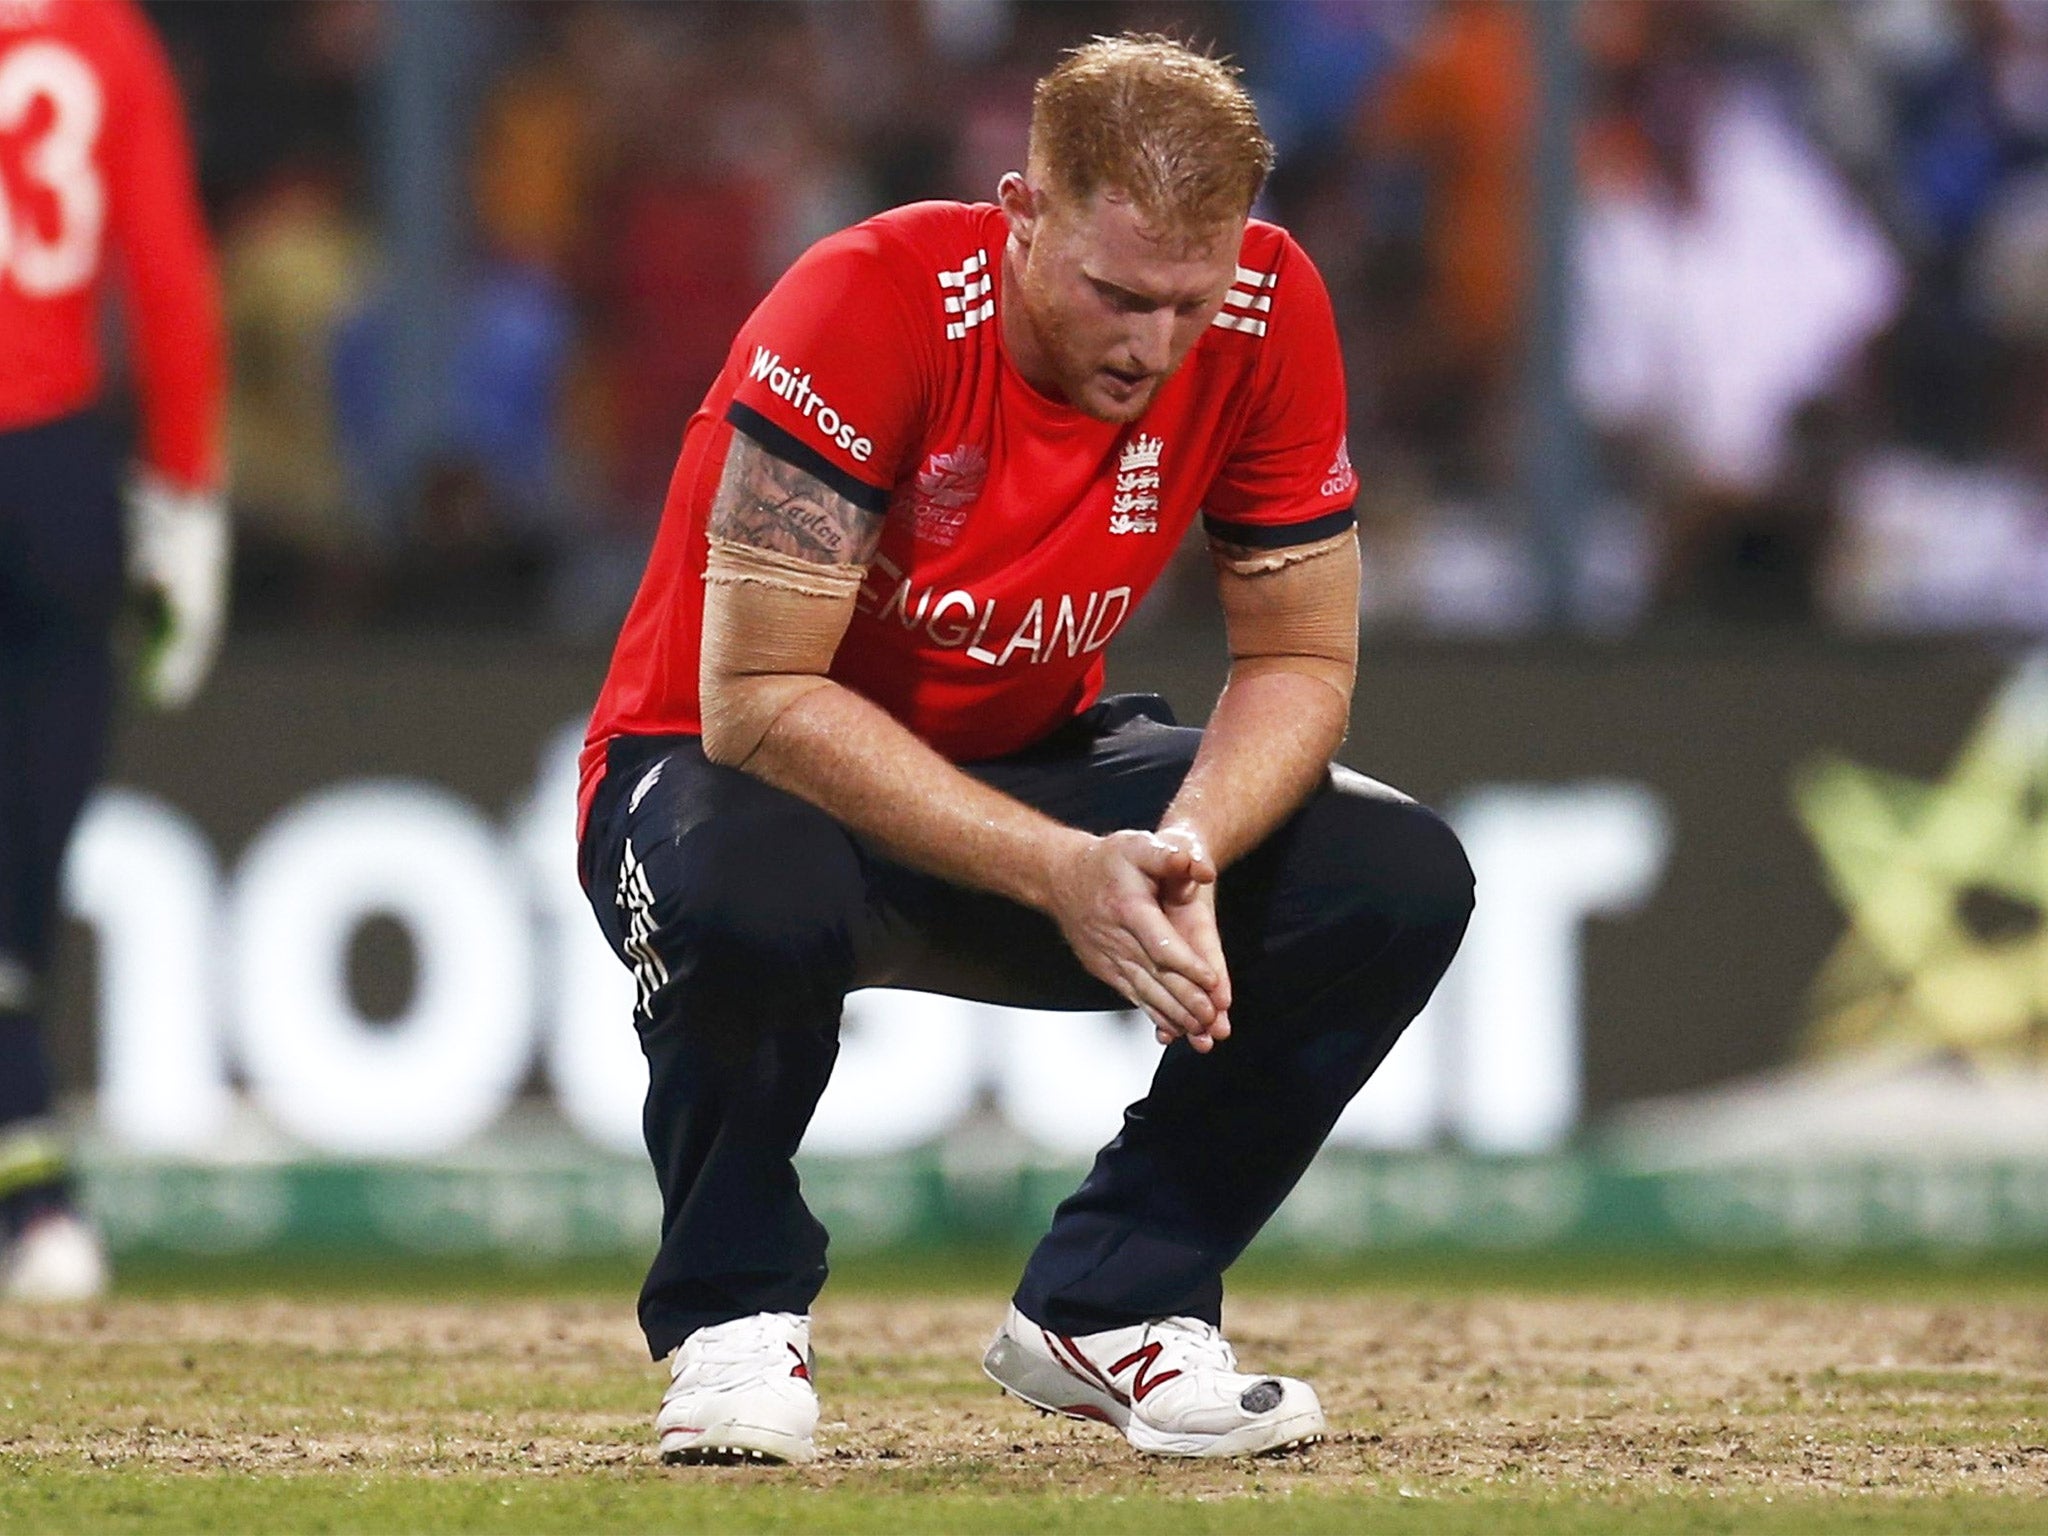 Ben Stokes been on the receiving end of much criticism since England's World Twenty20 final defeat